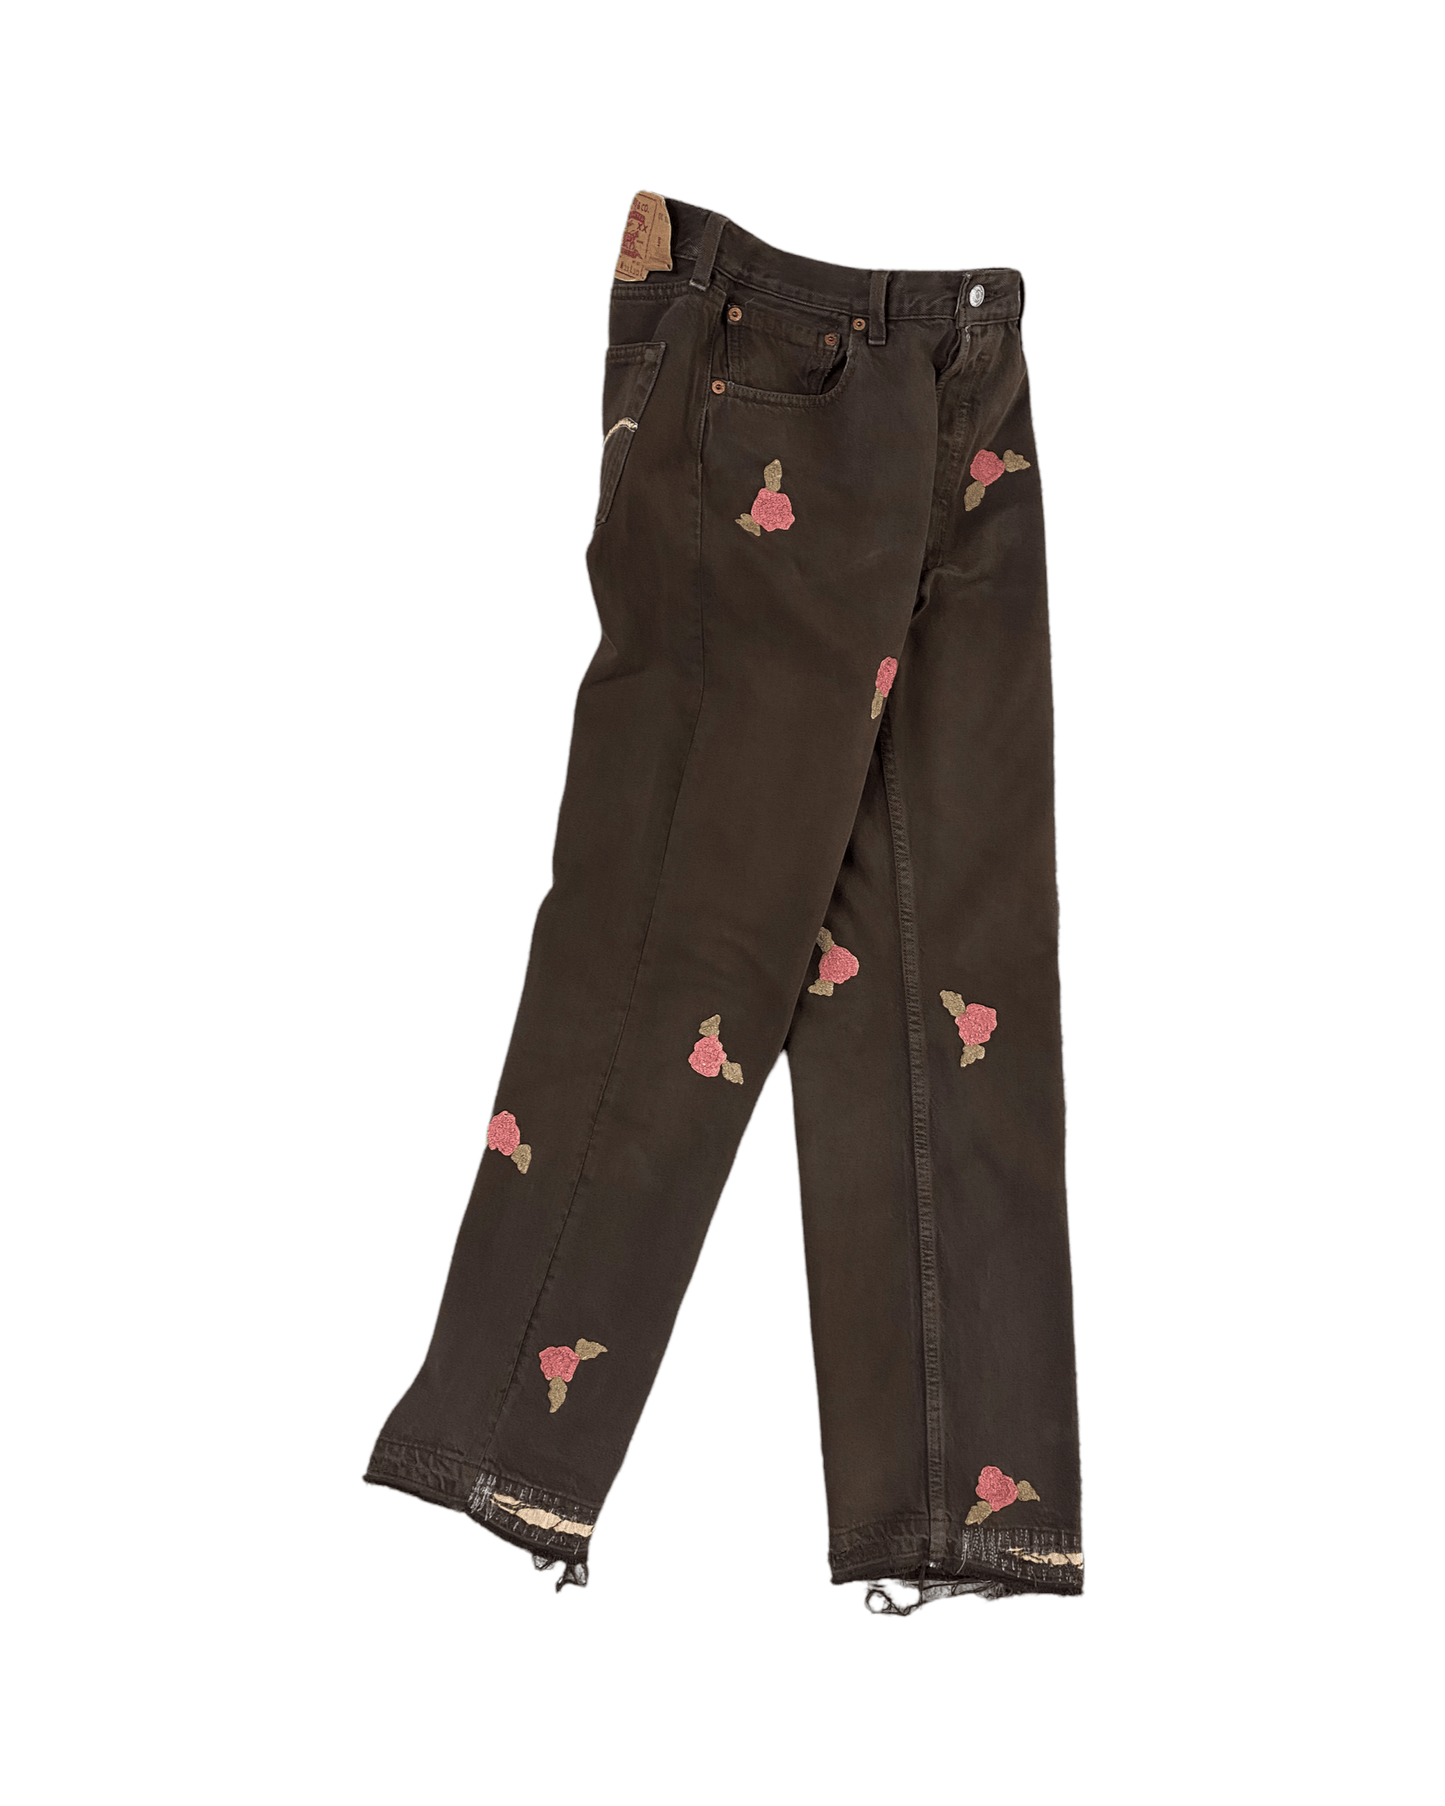 ROSES JEANS - easter edition - Nicolò Puccini